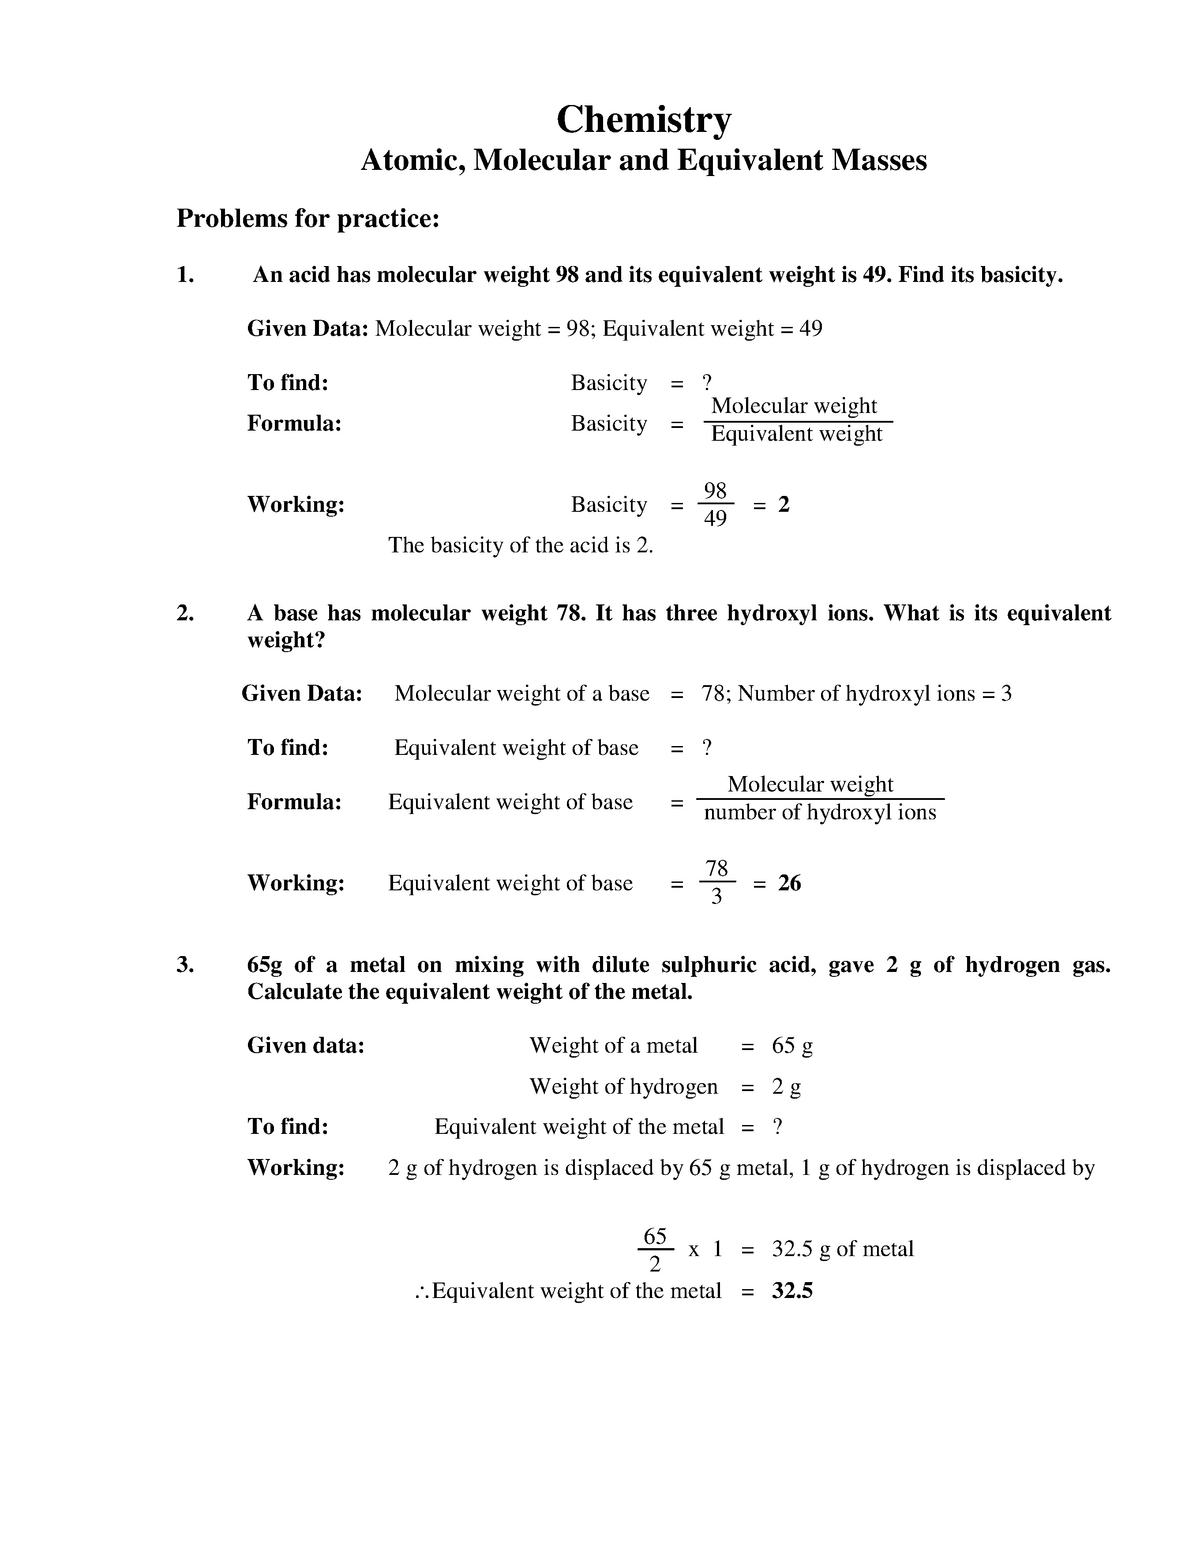 chemistry-chapter-2-atomic-molecular-problems-for-practice-98-49-65-2